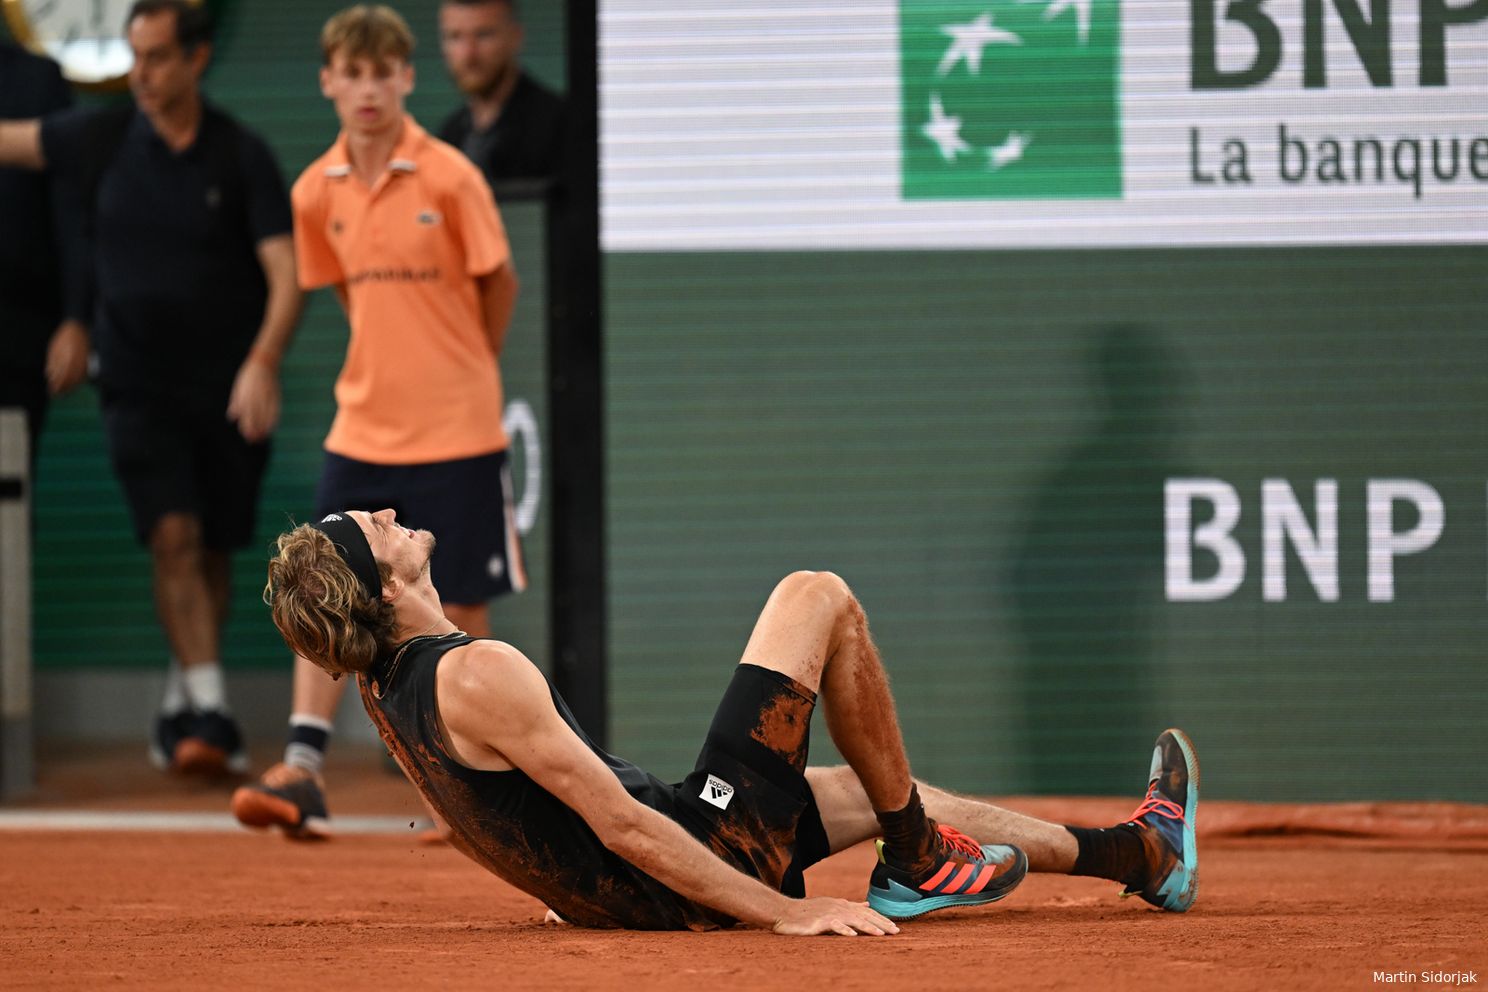 Zverev has been out of action since the Roland Garros semi-finals